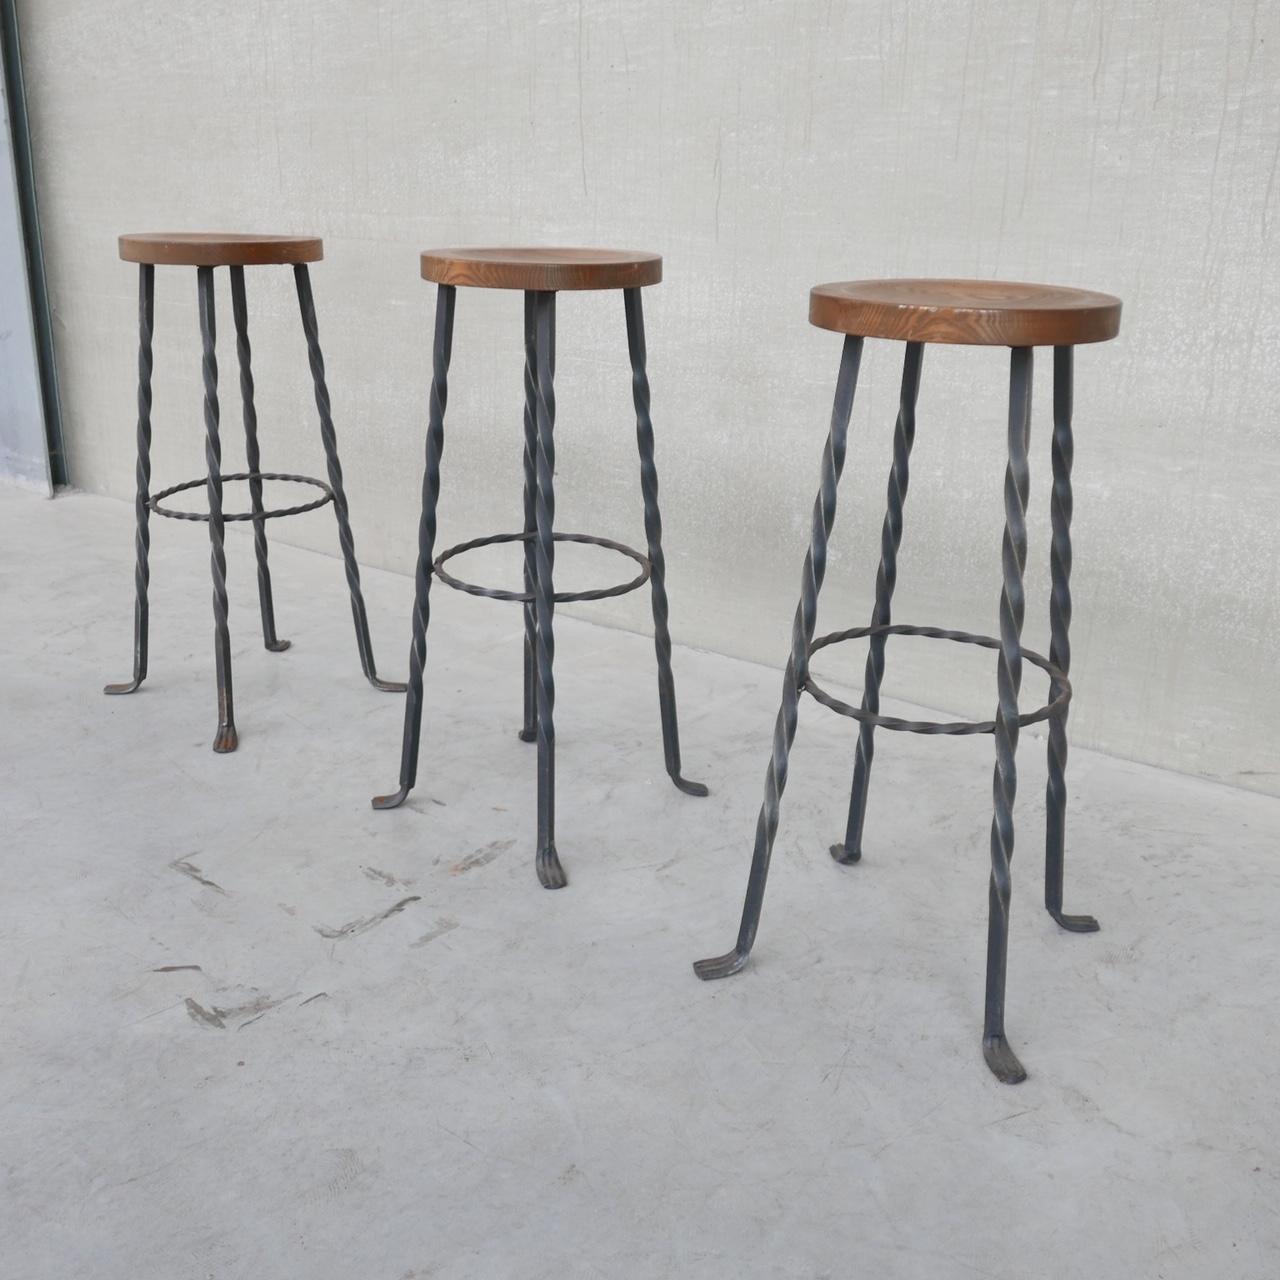 A set of three bar stools. 

Brutalist style, turned iron base with wooden top likely oak. 

Holland, c1960s. 

Price is for the set of three. 

Some small marks to the tops, they could be stripped and refinished. Some light rusting